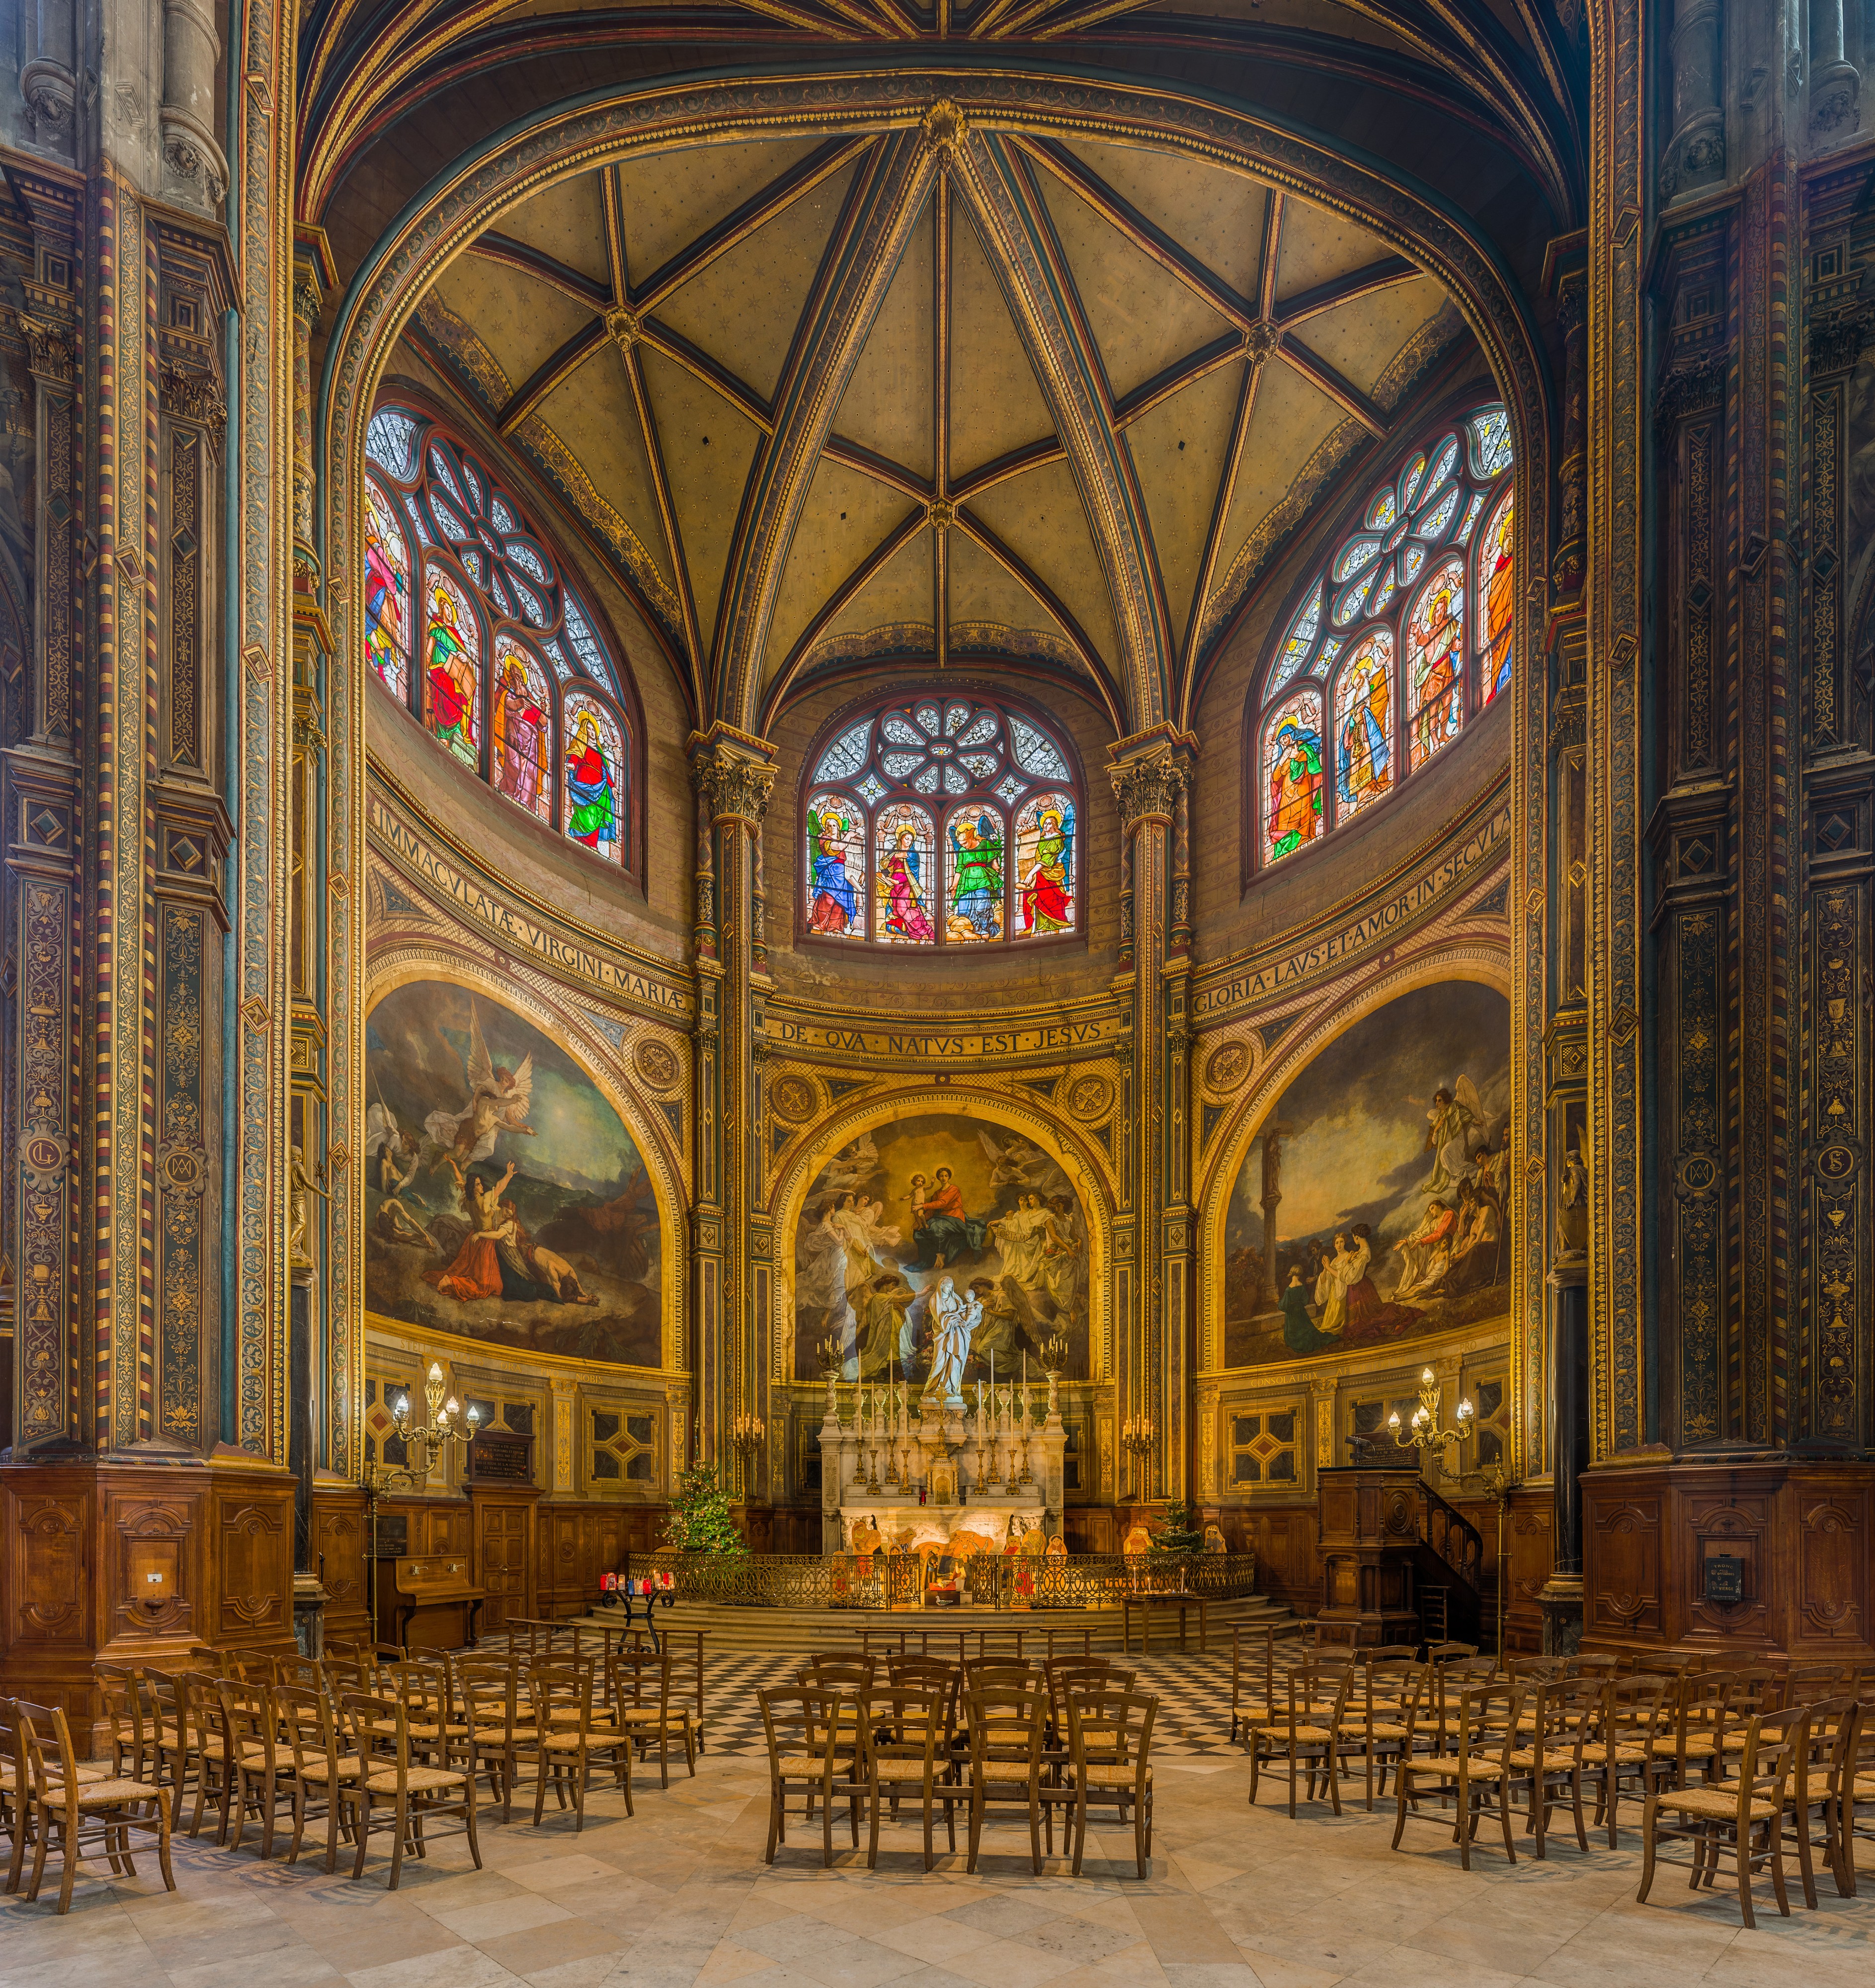 Church of St Eustace, Chapel of the Virgin Mary, Paris, France - Diliff